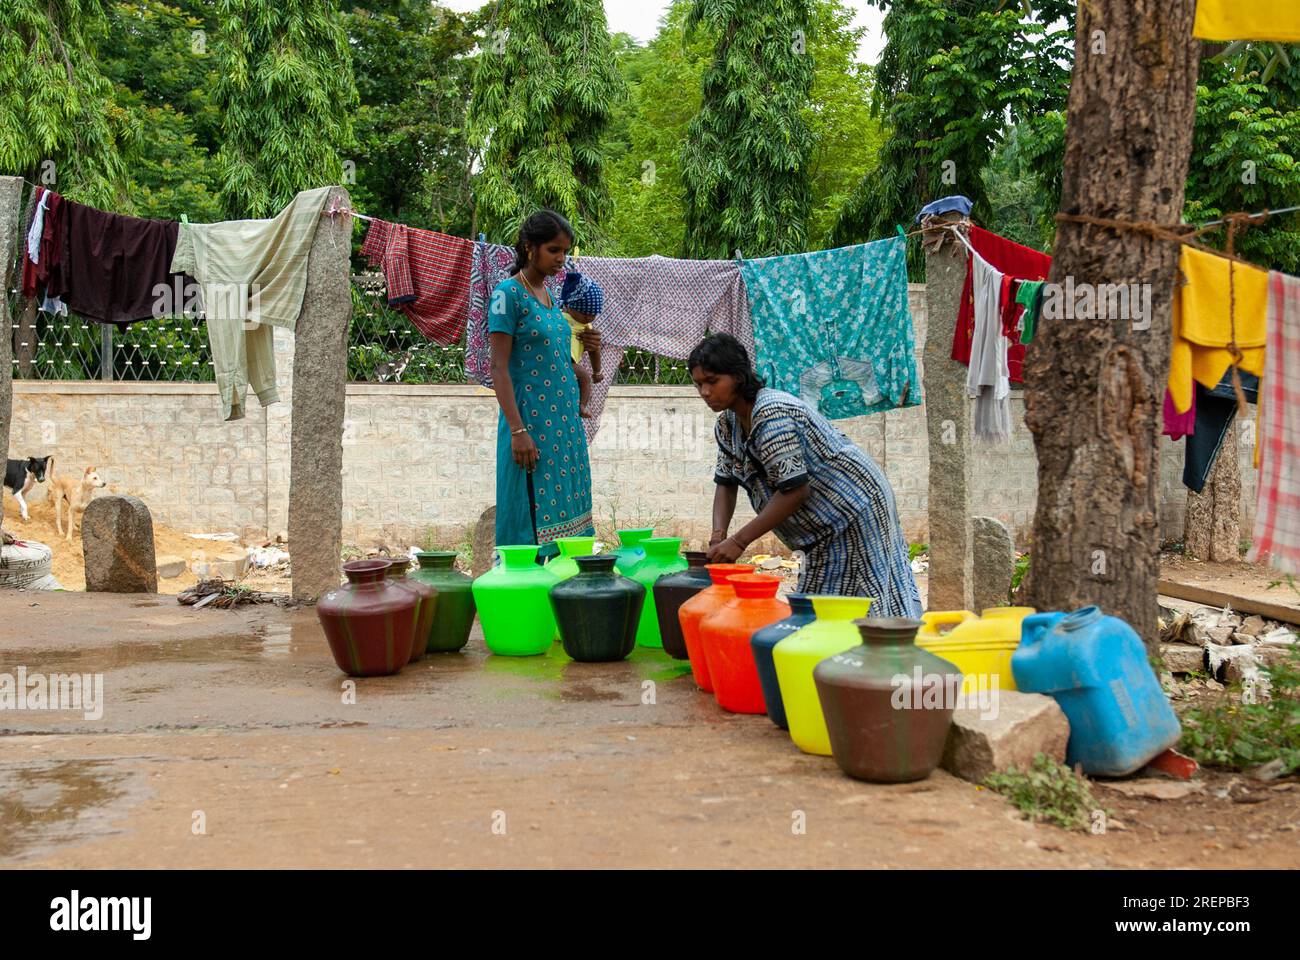 Bangalore, India - August 6, 2011: Ladies with plastic containers filled with water point to a lack of potable drinking water in Bangalore, India on A Stock Photo